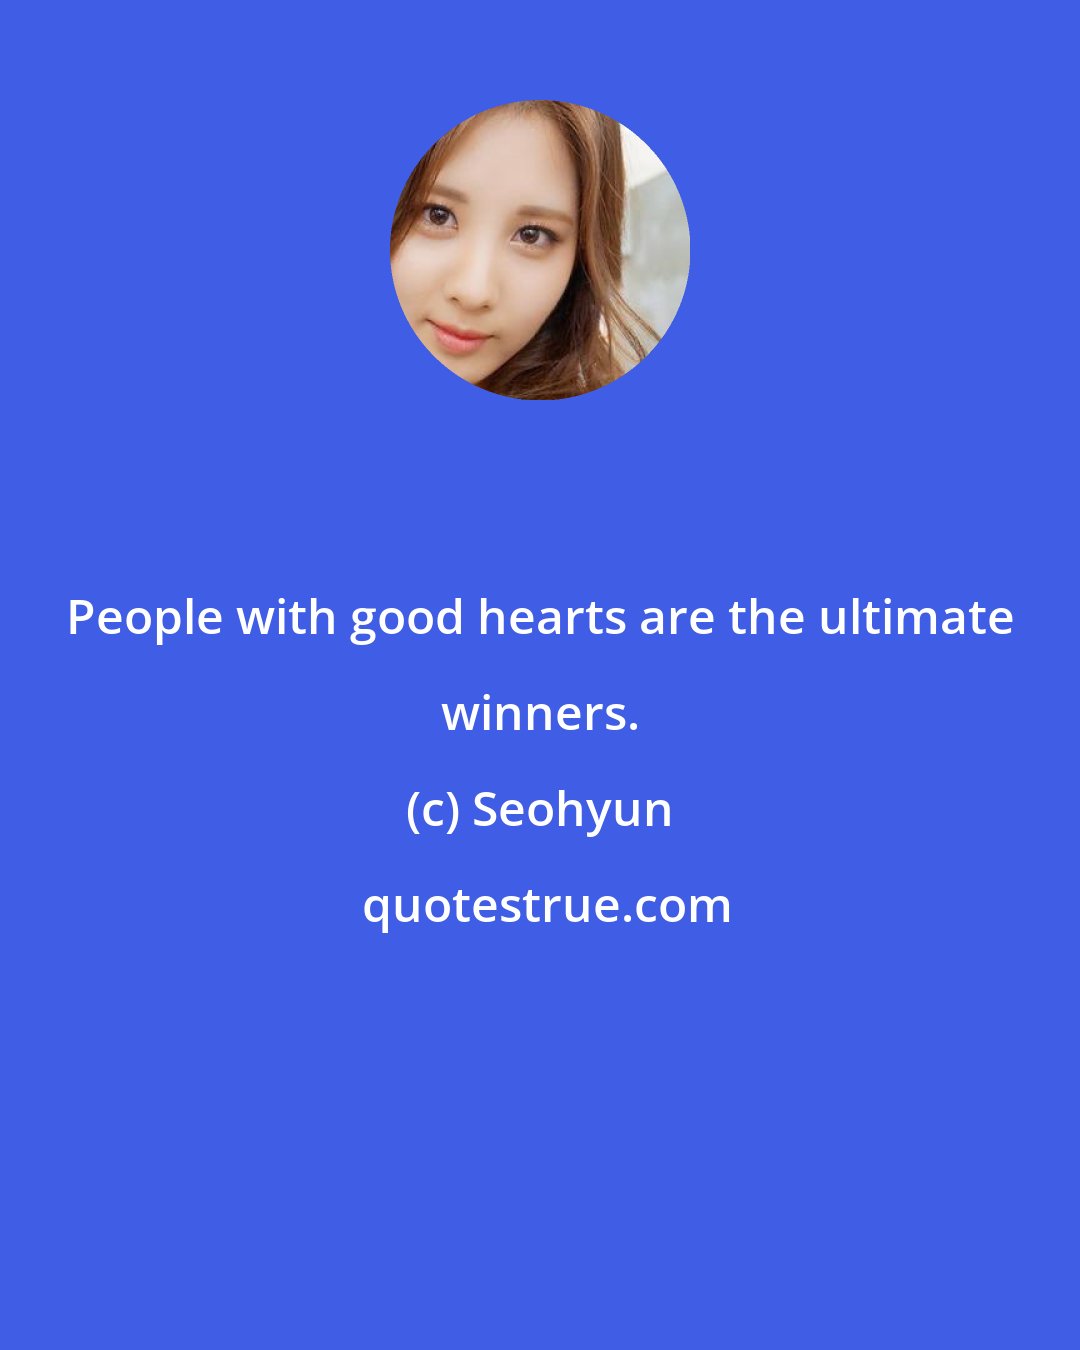 Seohyun: People with good hearts are the ultimate winners.